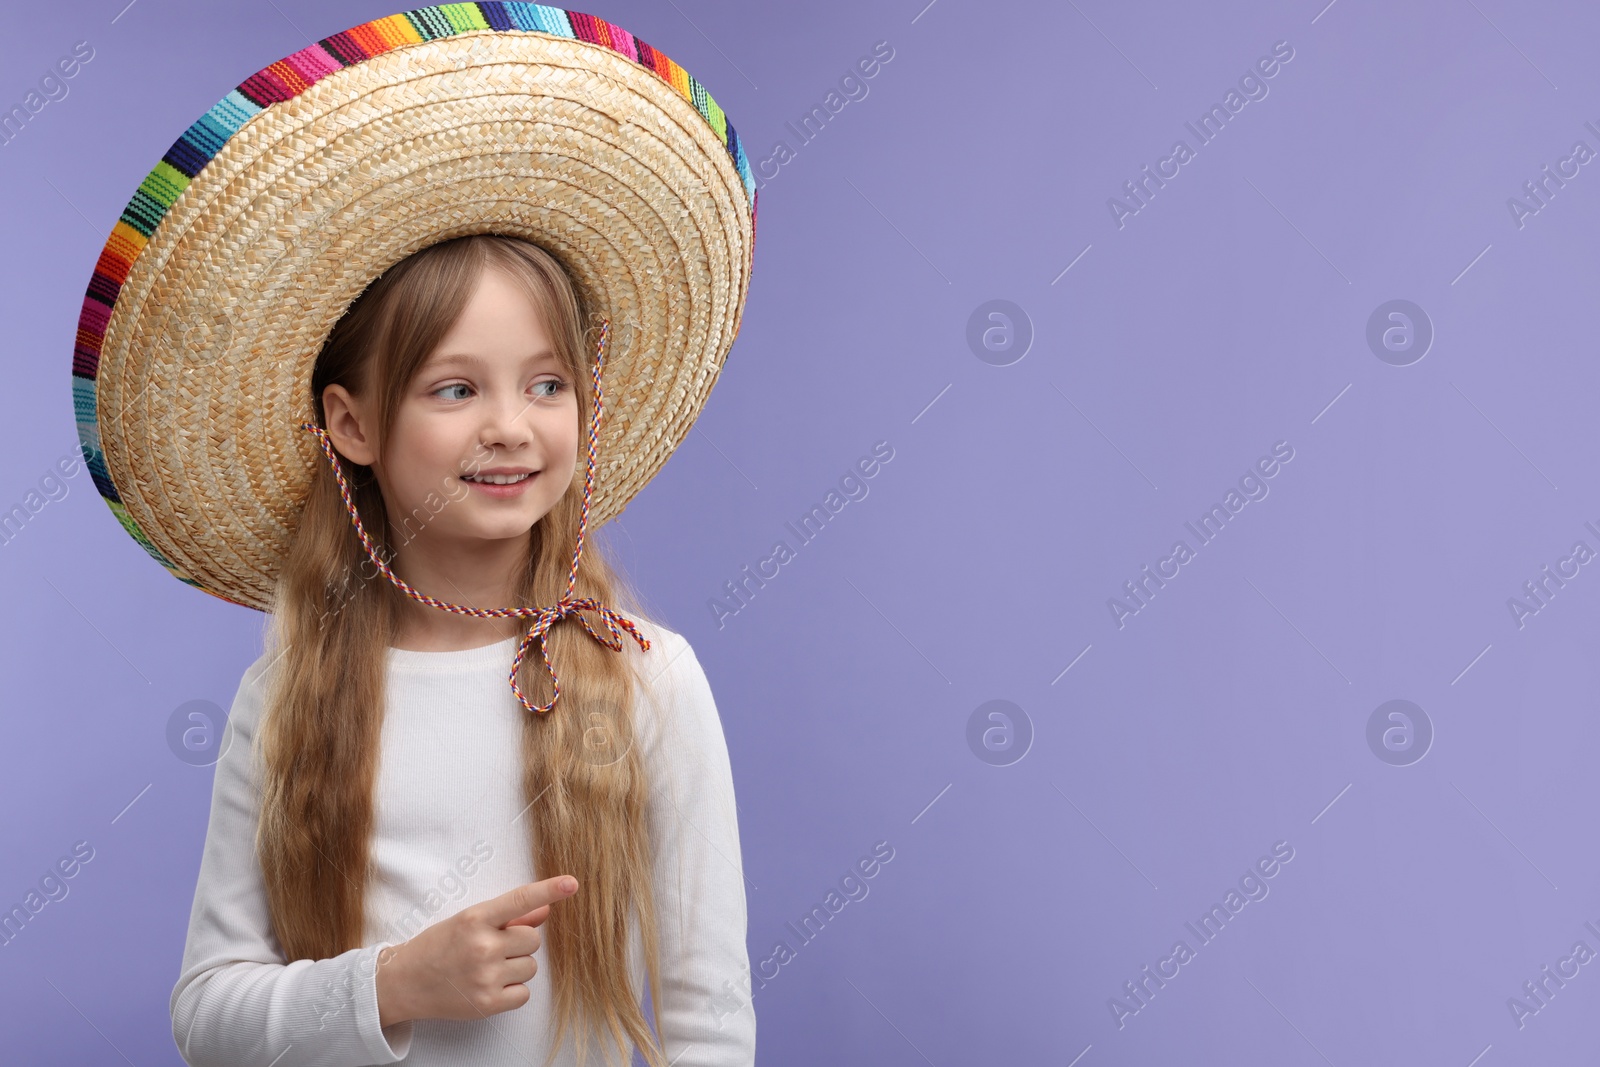 Photo of Cute girl in Mexican sombrero hat pointing at something on purple background. Space for text